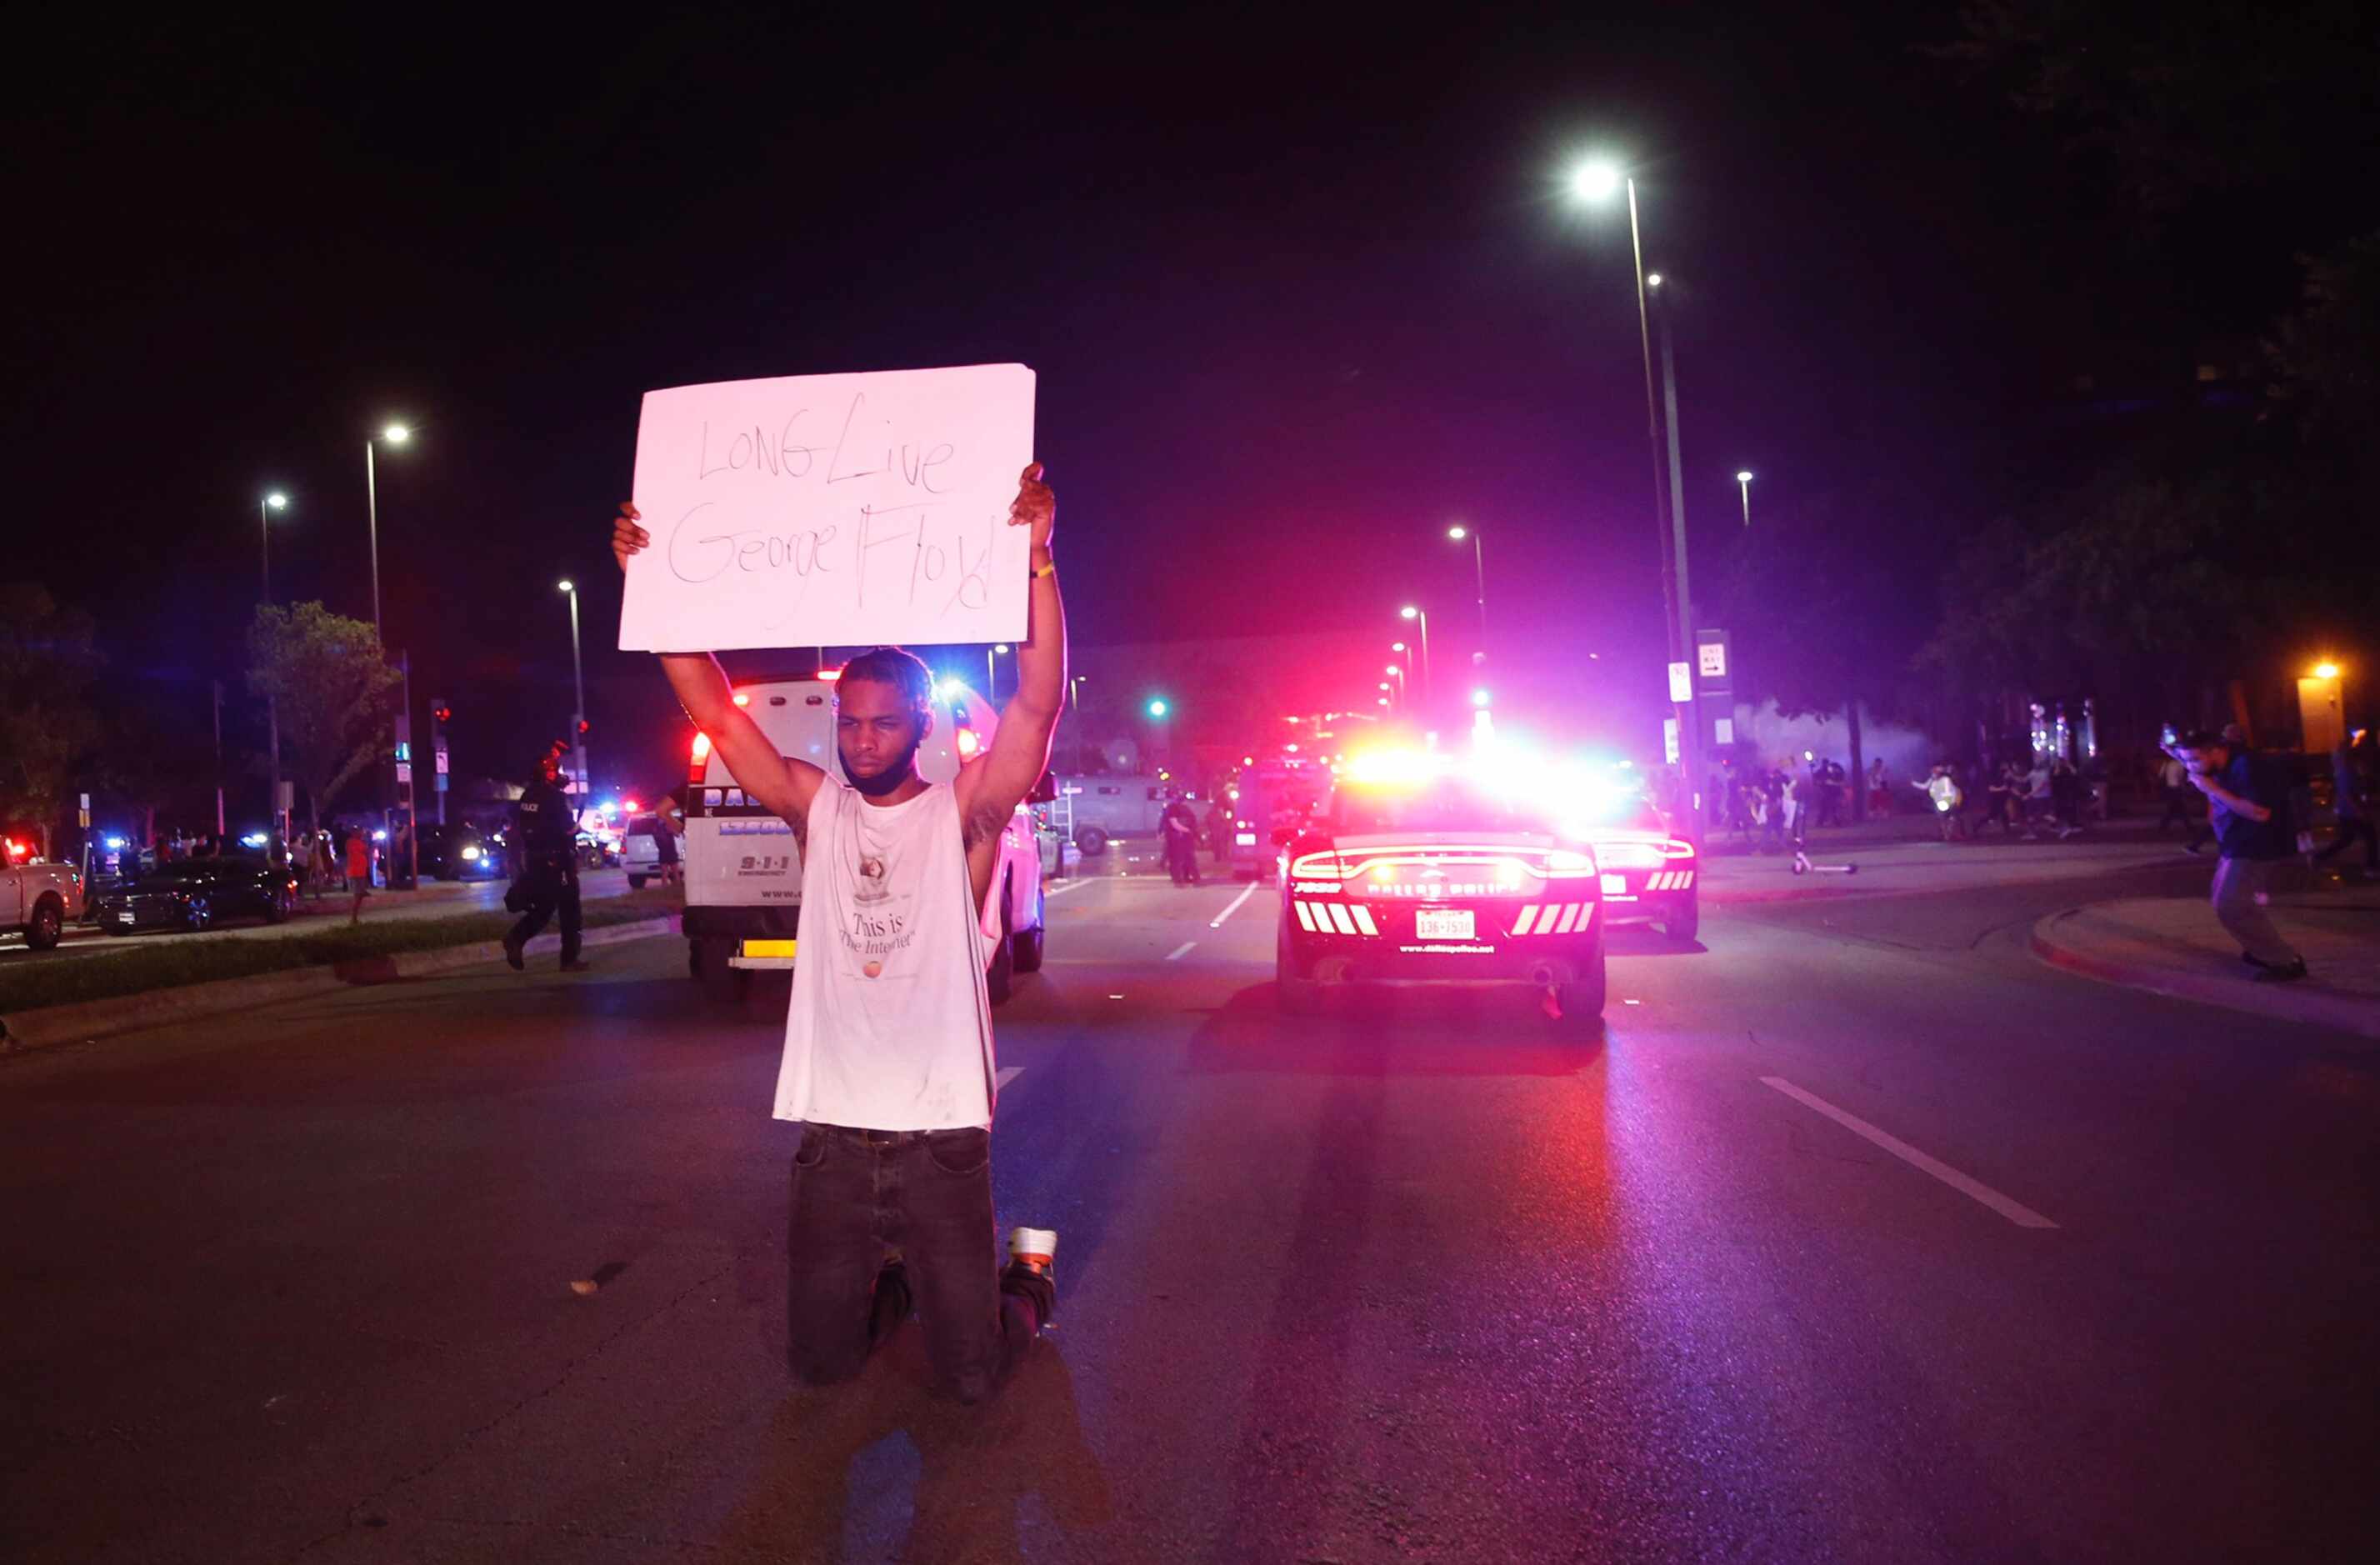 Jordan Spotser Of Dallas holds up a sign as protesters rally during a demonstration against...